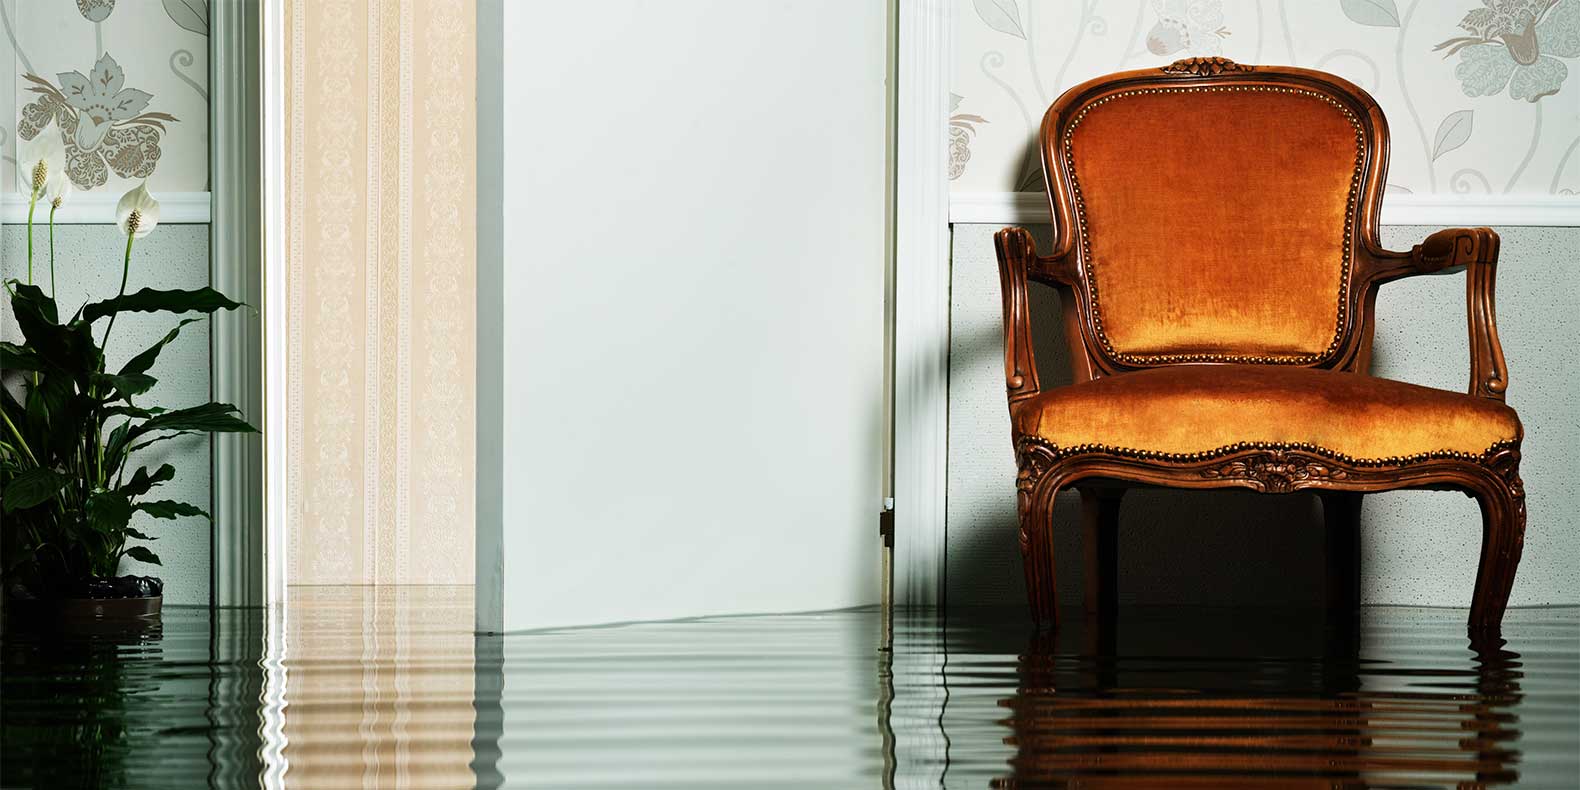 How to Prevent Flooding in Your Home